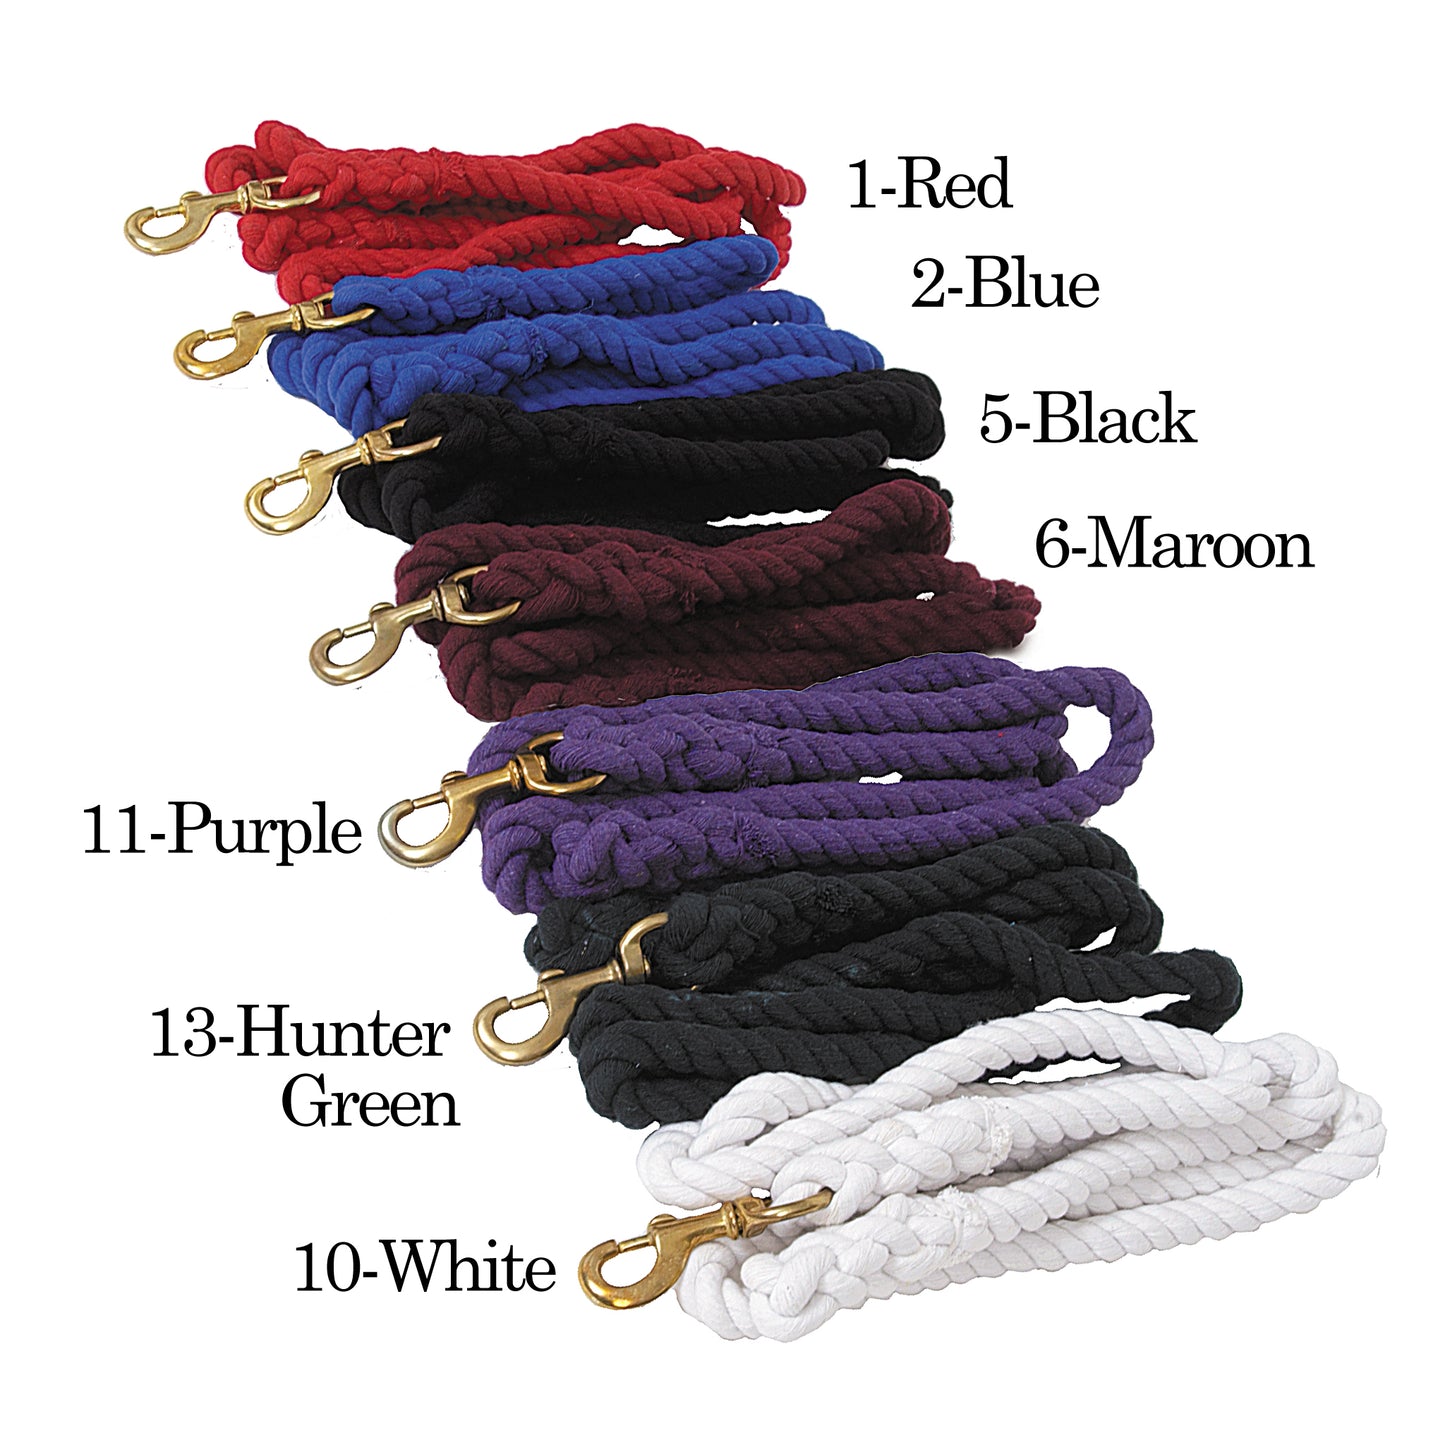 3/4" Thick Colored Cotton Leads with Swivel Chain